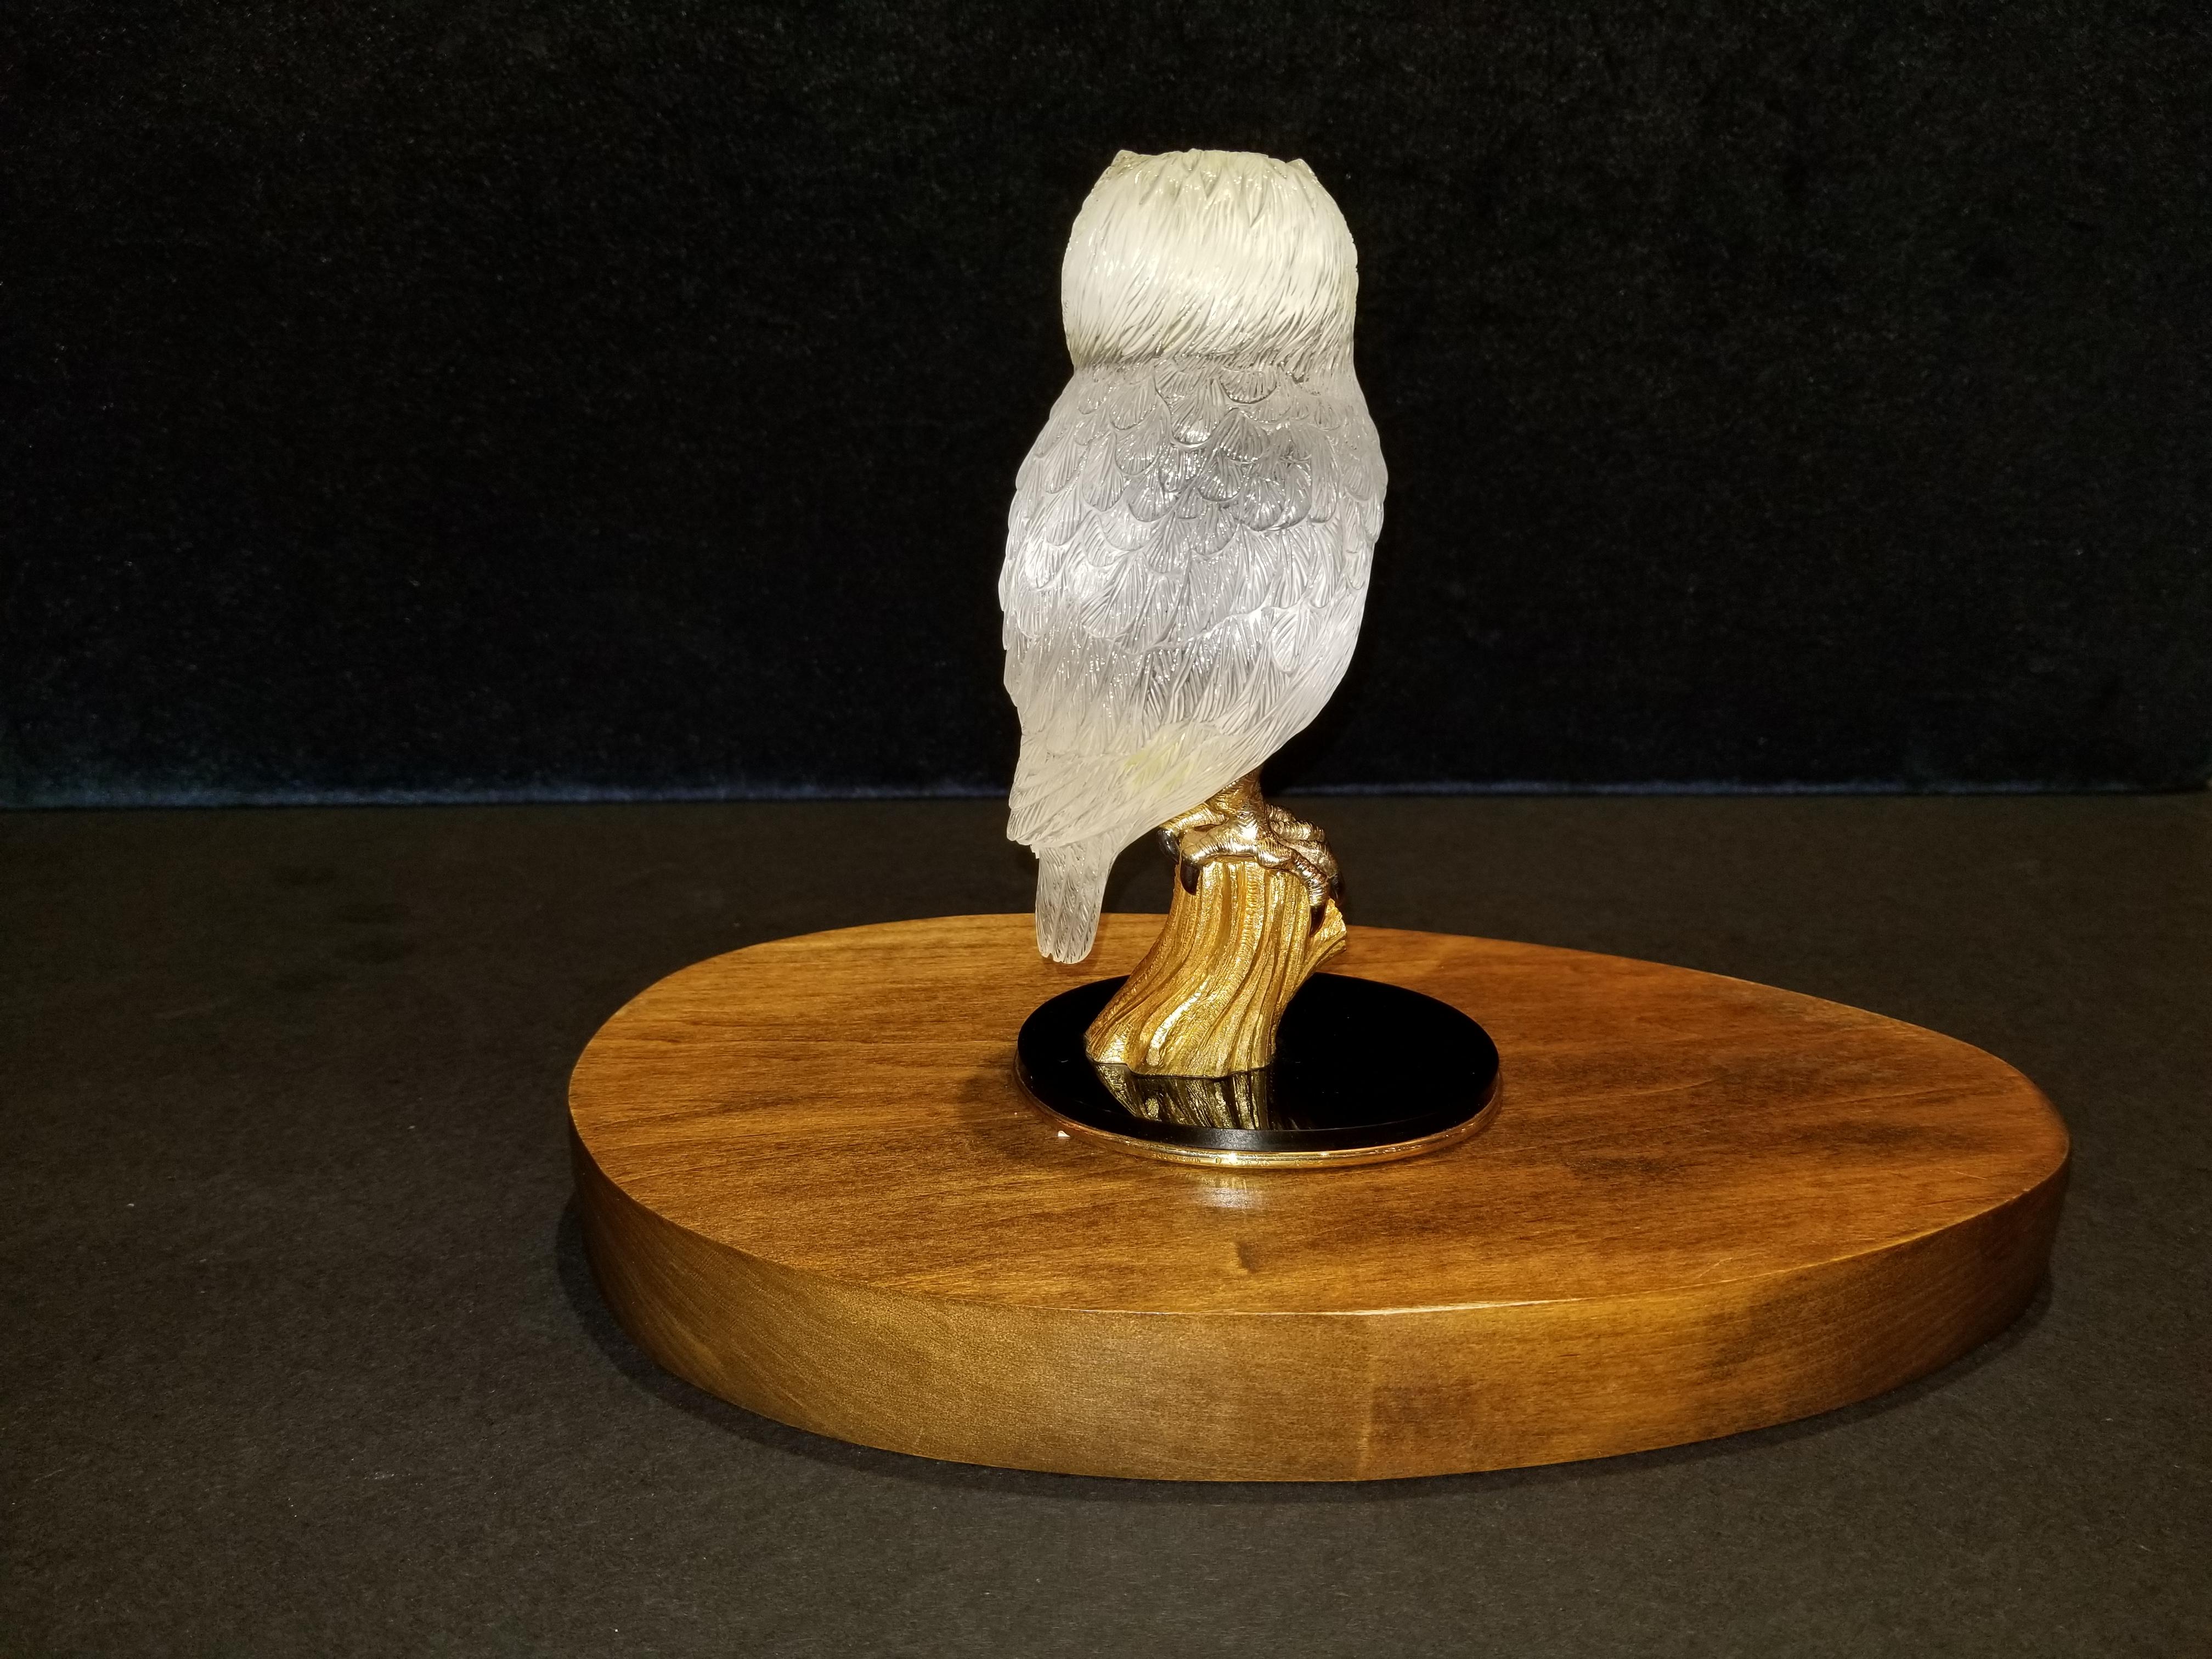 Signed Boucheron Rock Crystal and 18k Gold Owl Statue with Gold and Onyx Eyes 1